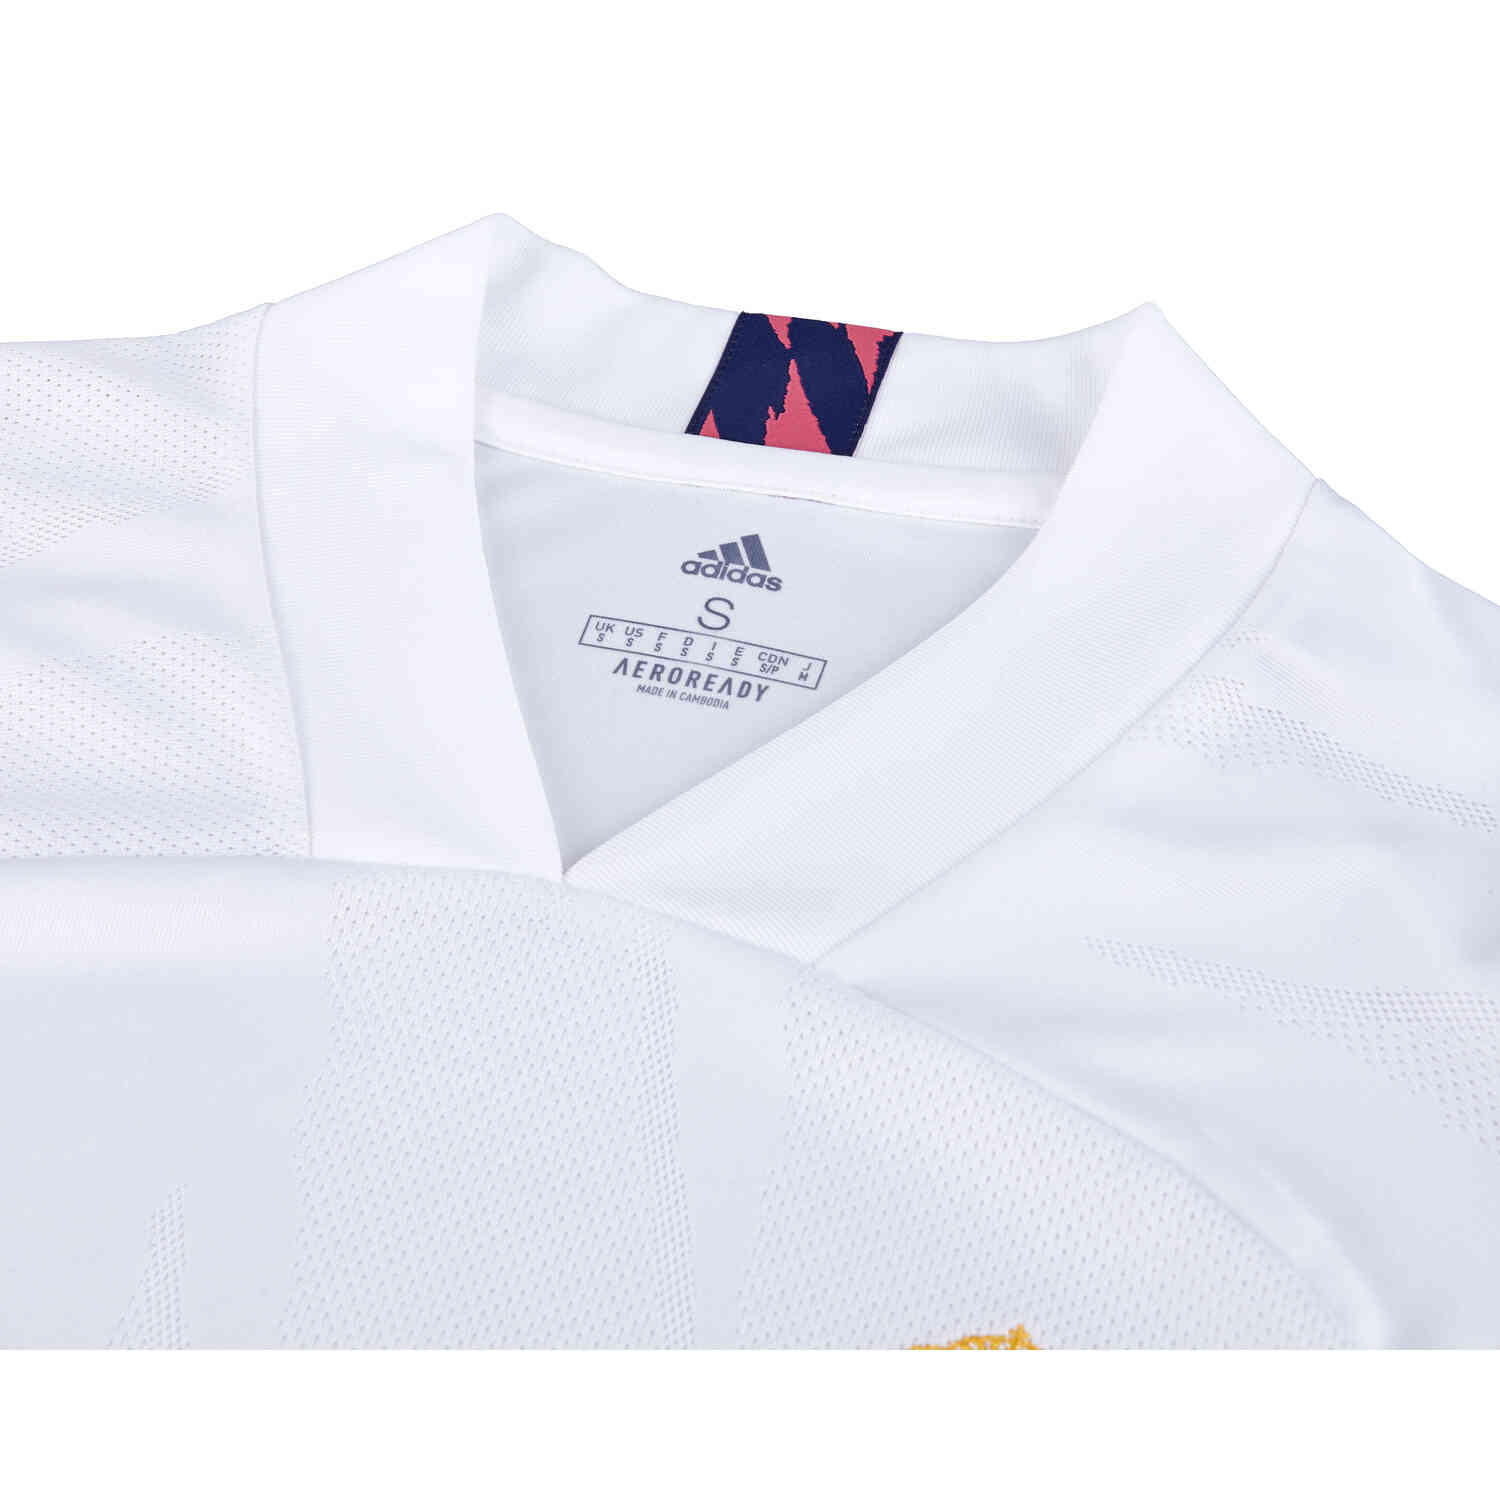 Maillot Foot enfant →REAL MADRID / FLY EMIRATES / ADIDAS